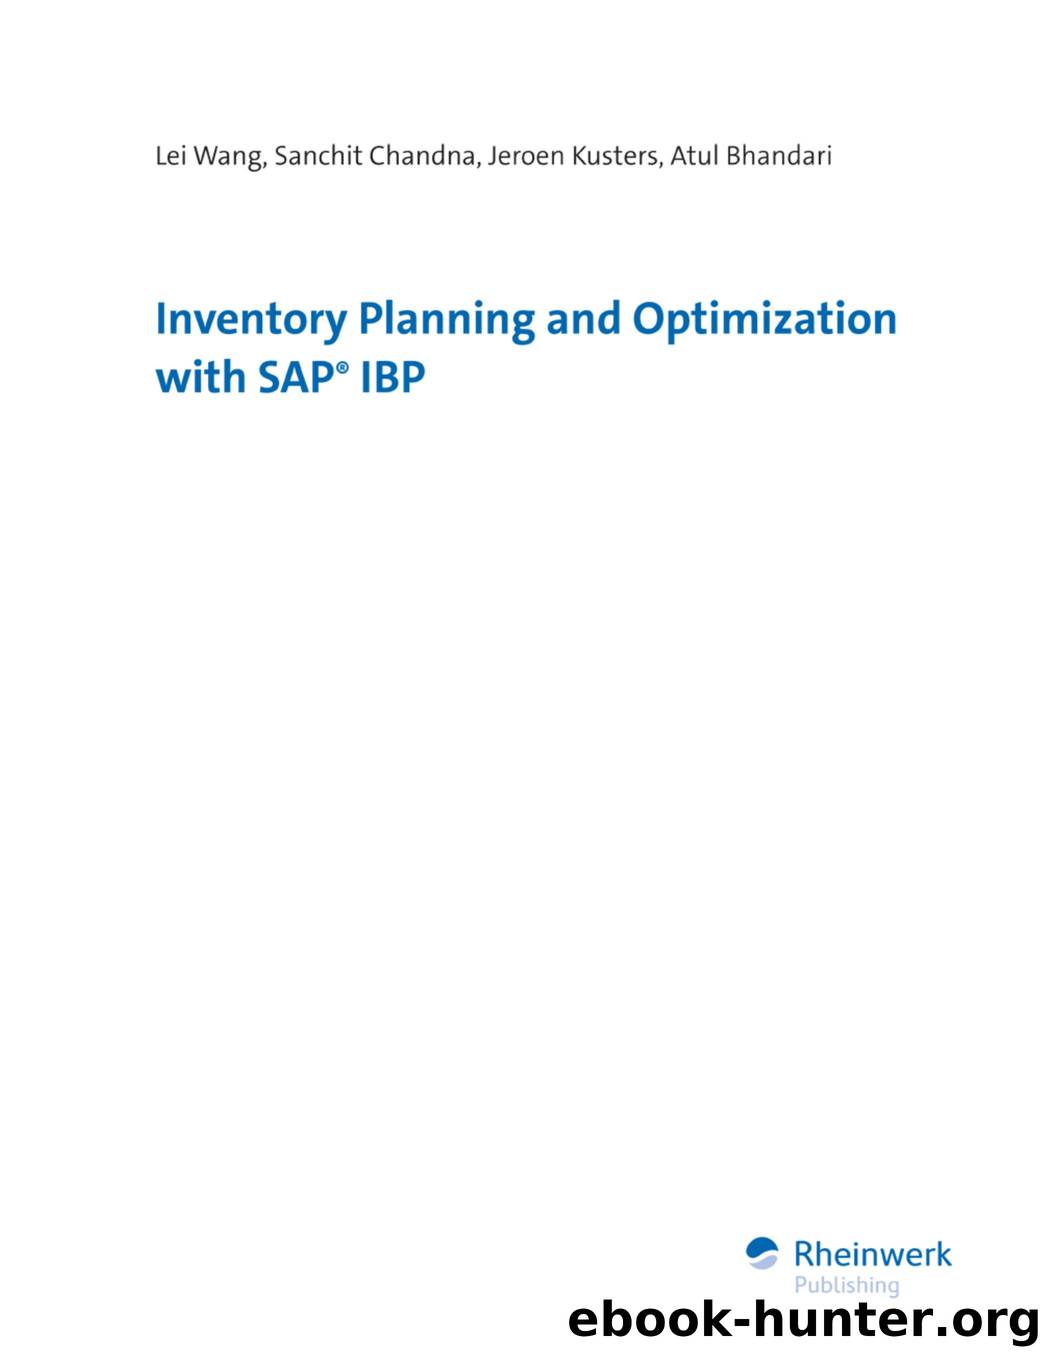 Inventory Planning and Optimization with SAP IBP by Unknown